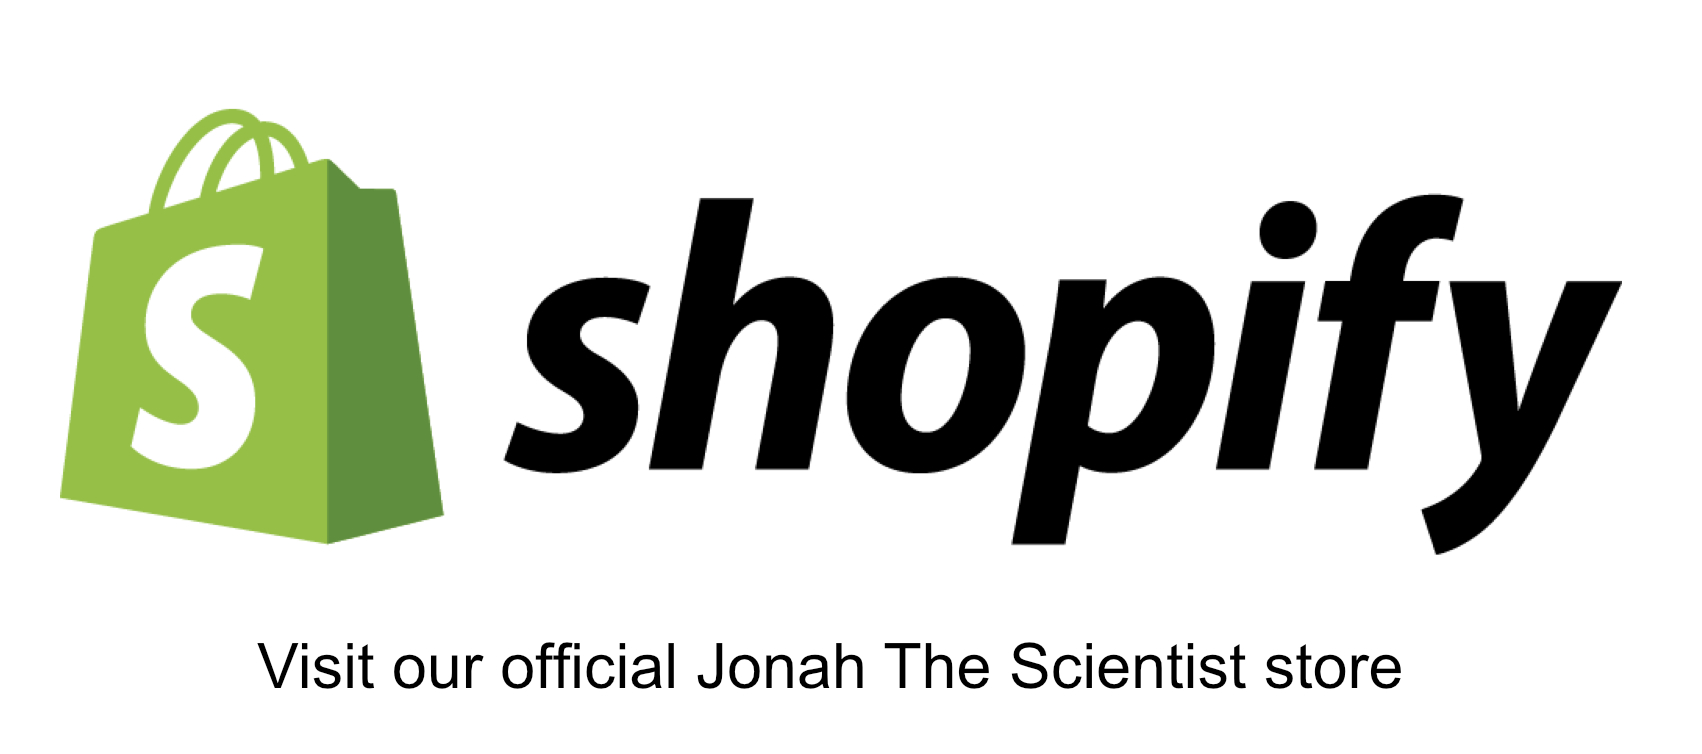 Visit our official Jonah The Scientist store.jpg